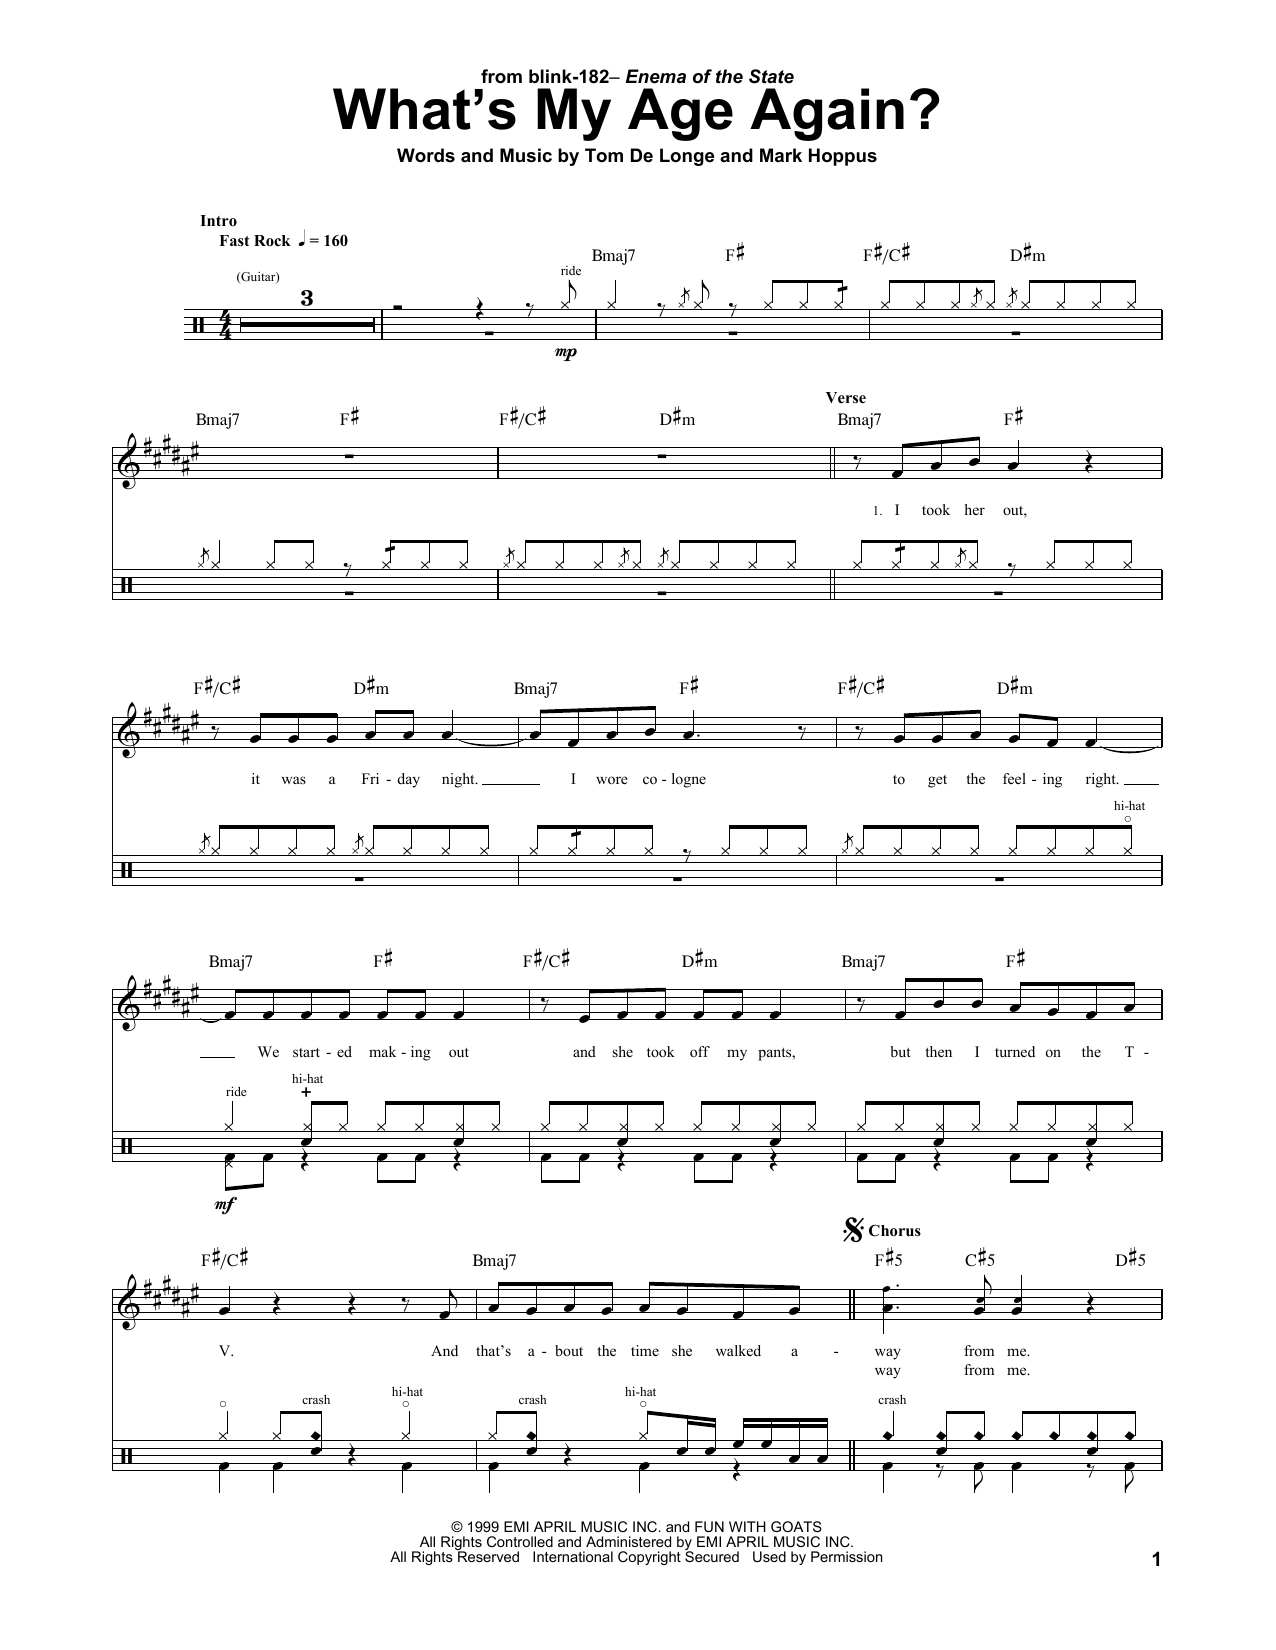 Blink 182, What's My Age Again?, sheet music, piano notes, score, chor...